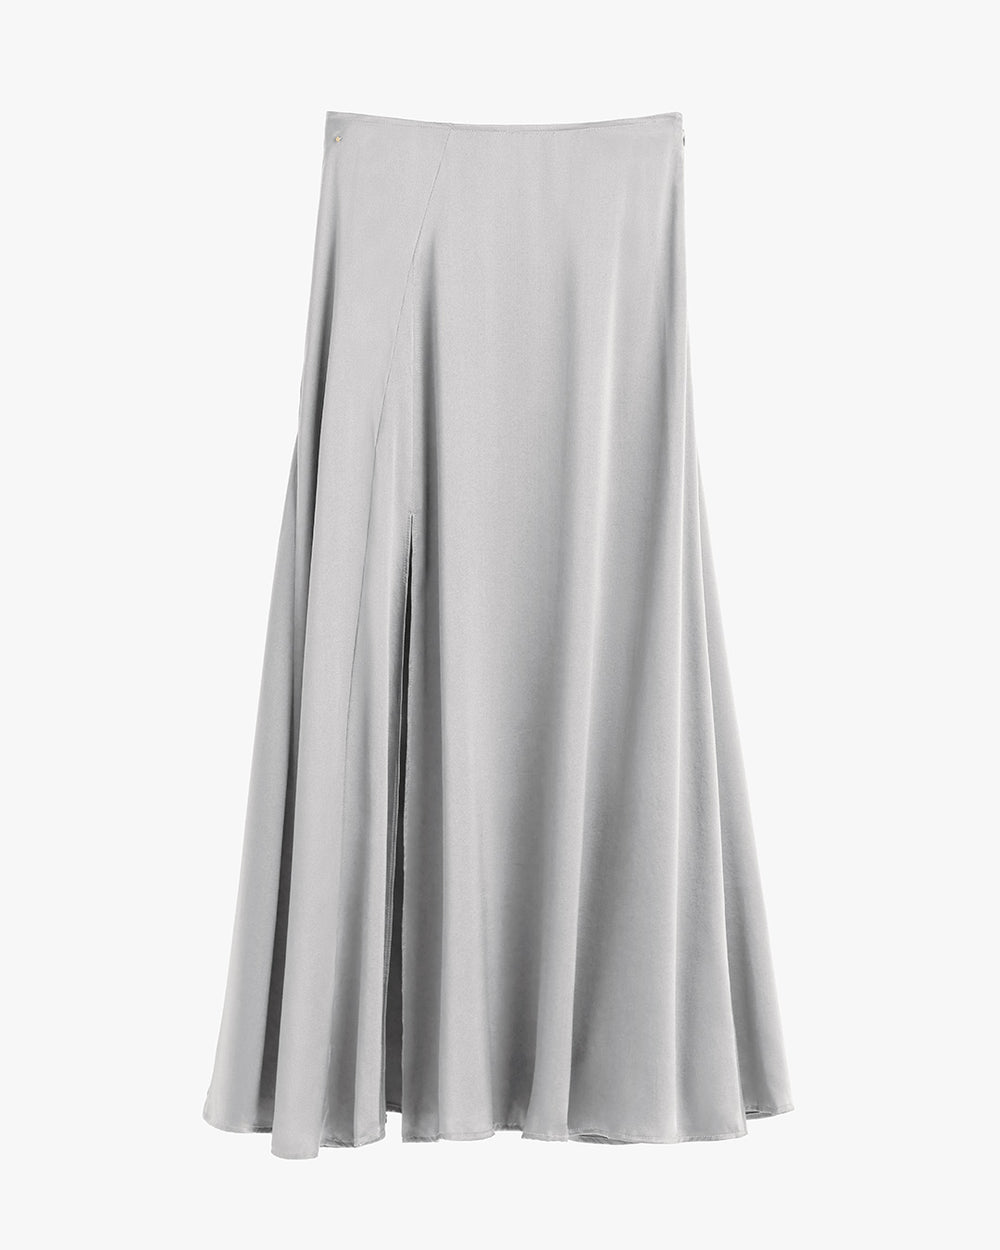 Flowing long skirt with a wide hem and side zipper